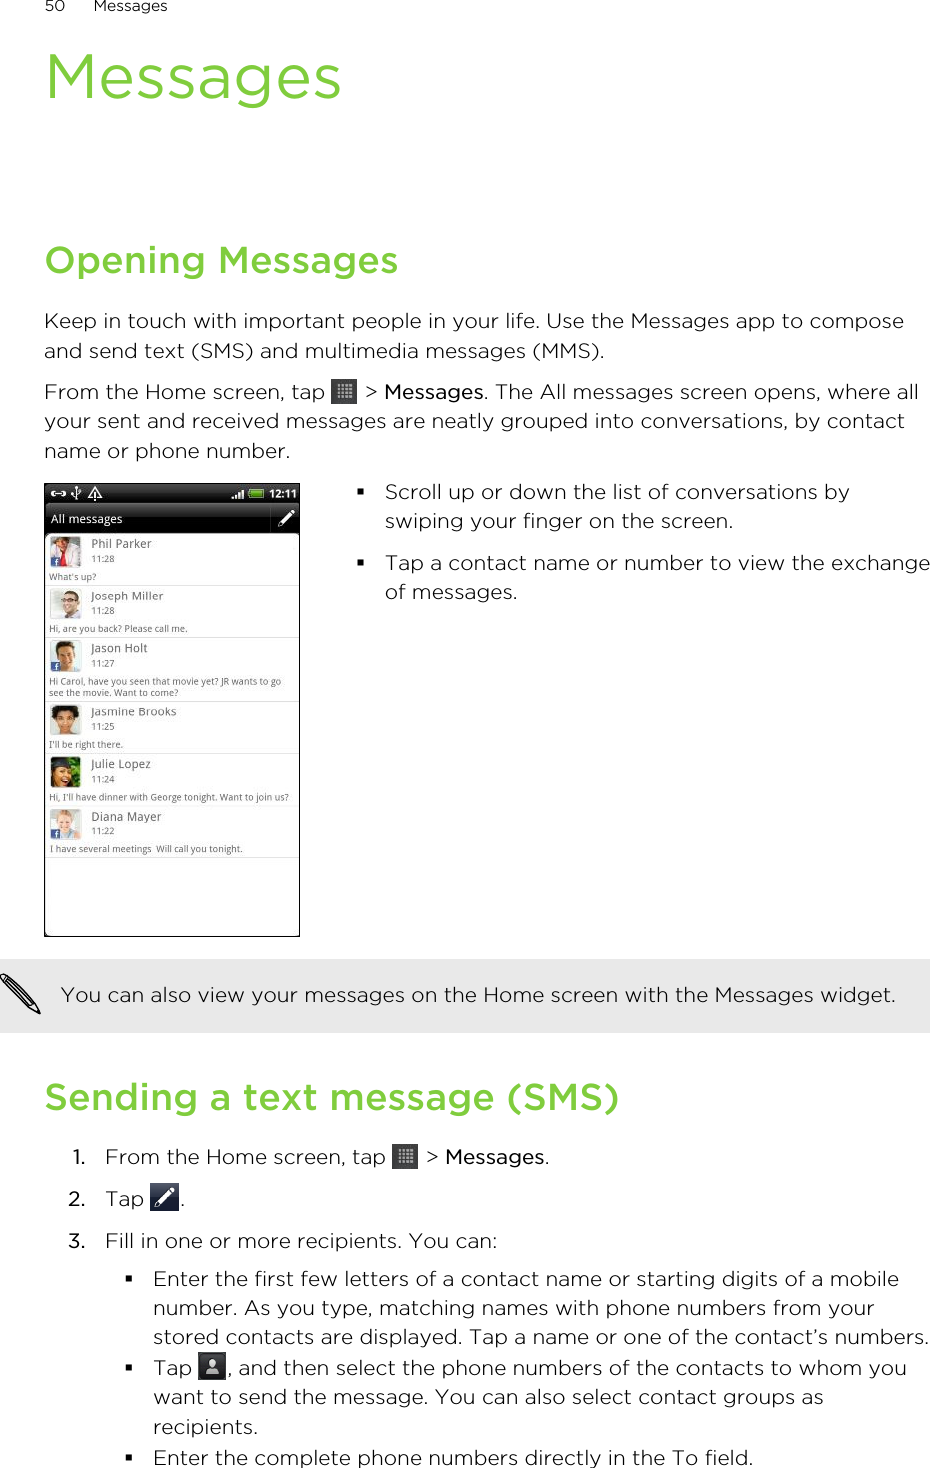 MessagesOpening MessagesKeep in touch with important people in your life. Use the Messages app to composeand send text (SMS) and multimedia messages (MMS).From the Home screen, tap   &gt; Messages. The All messages screen opens, where allyour sent and received messages are neatly grouped into conversations, by contactname or phone number.§Scroll up or down the list of conversations byswiping your finger on the screen.§Tap a contact name or number to view the exchangeof messages.You can also view your messages on the Home screen with the Messages widget.Sending a text message (SMS)1. From the Home screen, tap   &gt; Messages.2. Tap  .3. Fill in one or more recipients. You can:§Enter the first few letters of a contact name or starting digits of a mobilenumber. As you type, matching names with phone numbers from yourstored contacts are displayed. Tap a name or one of the contact’s numbers.§Tap  , and then select the phone numbers of the contacts to whom youwant to send the message. You can also select contact groups asrecipients.§Enter the complete phone numbers directly in the To field.50 Messages